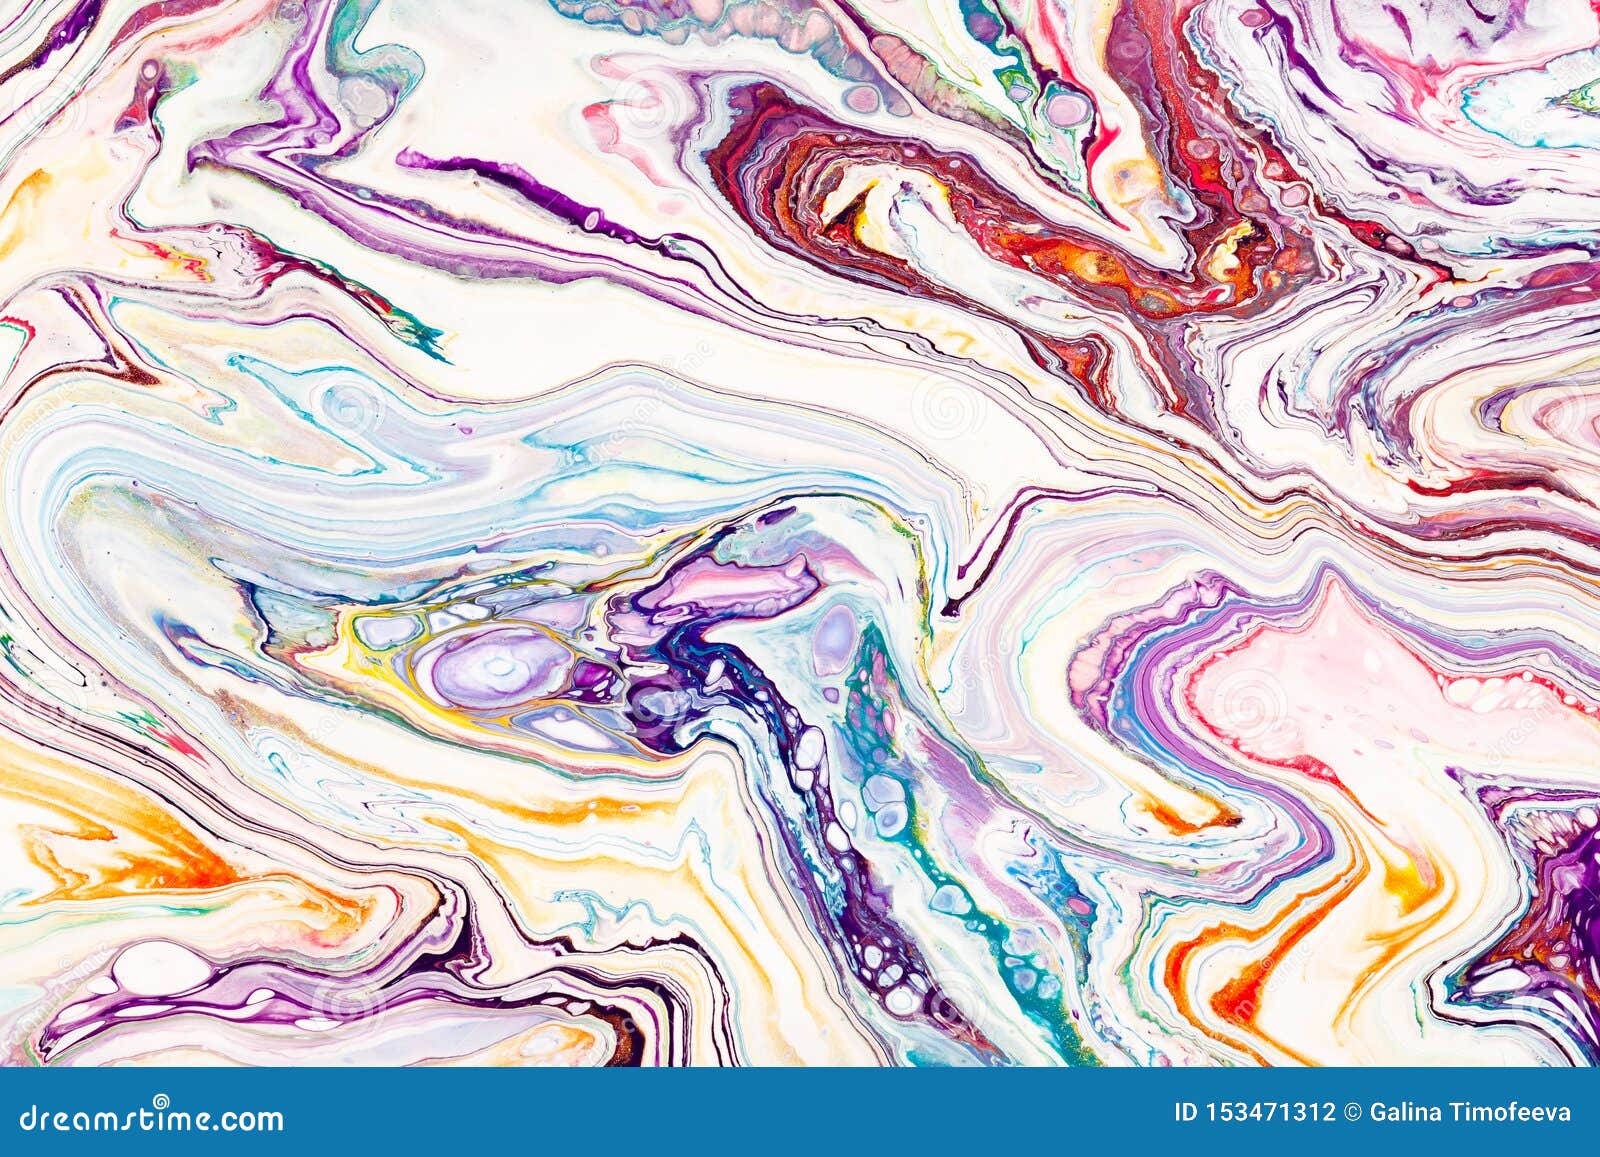 Oil Paint Mix Abstract Background. Rainbow Marble Texture. Acrylic Liquid  Flow Colorful Wallpaper Stock Photo - Image of minimal, dynamic: 153471312